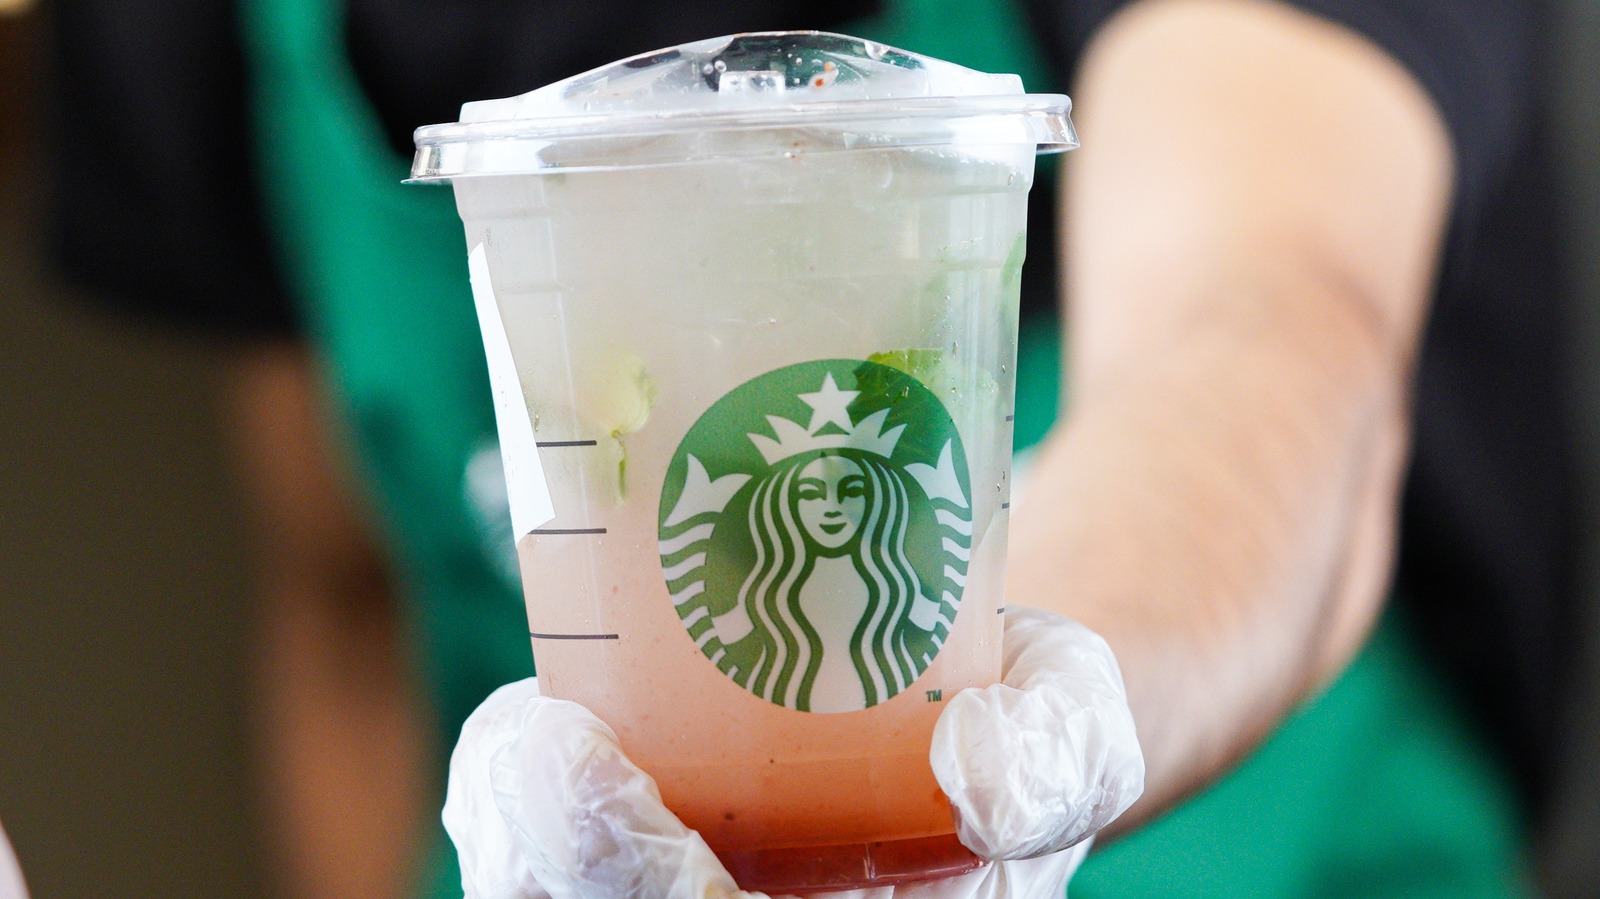 https://www.tastingtable.com/img/gallery/what-is-a-nitro-lid-at-starbucks-and-why-do-some-drinks-not-get-one/l-intro-1682090269.jpg